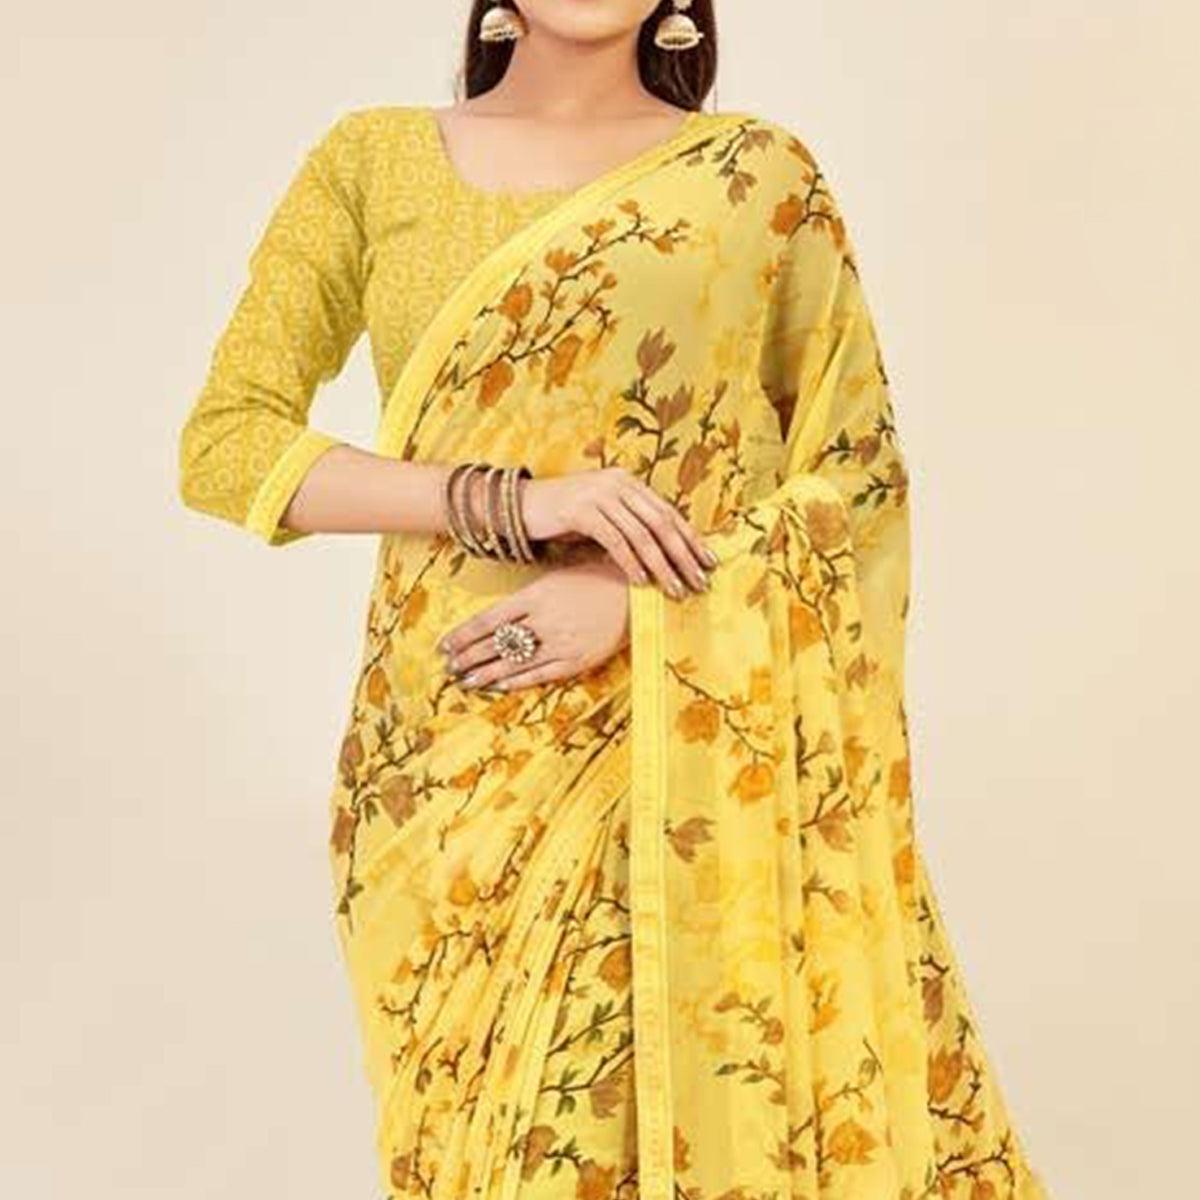 Yellow Casual Wear Floral Printed Georgette Saree - Peachmode